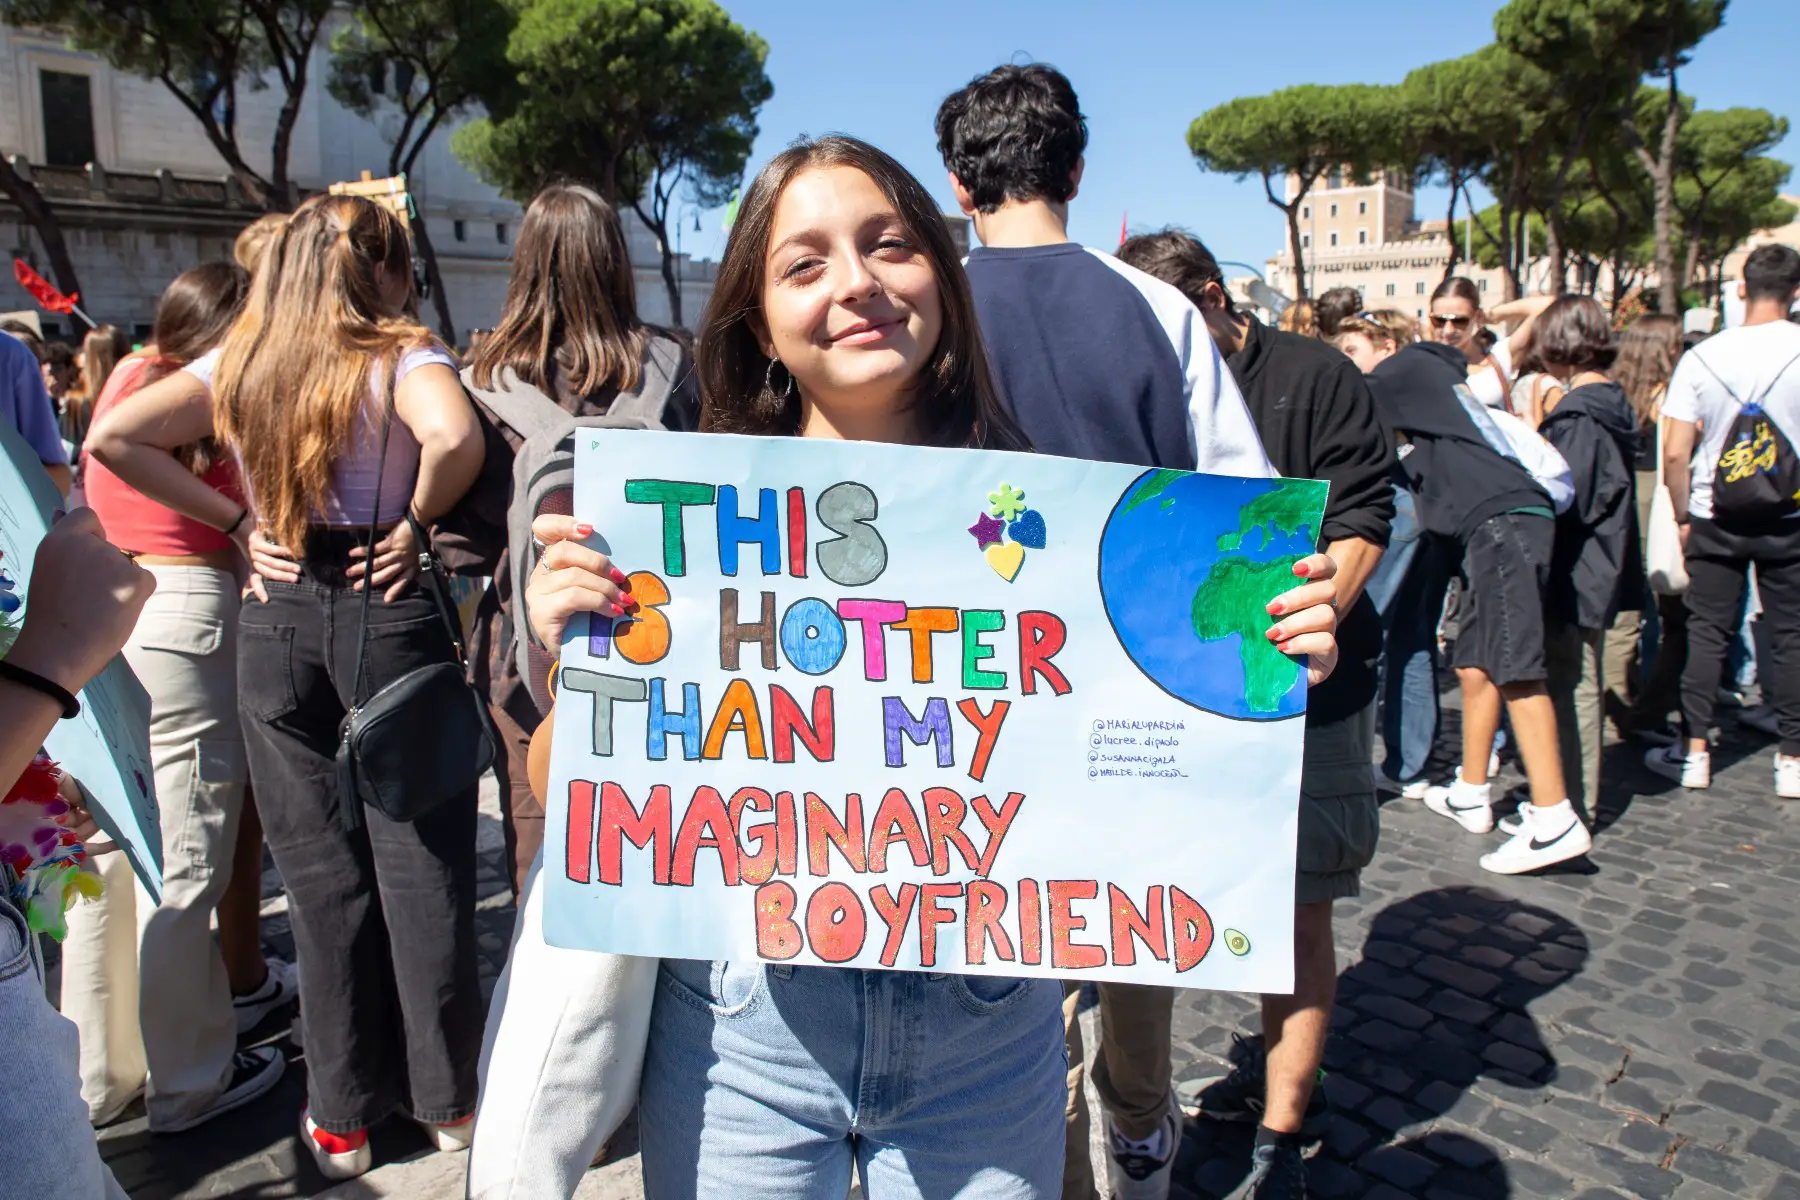 Protester with sign at climate protests in Italy, 2022 Climate Demonstration organized by Fridays For Future Italy in Rome, Italy 